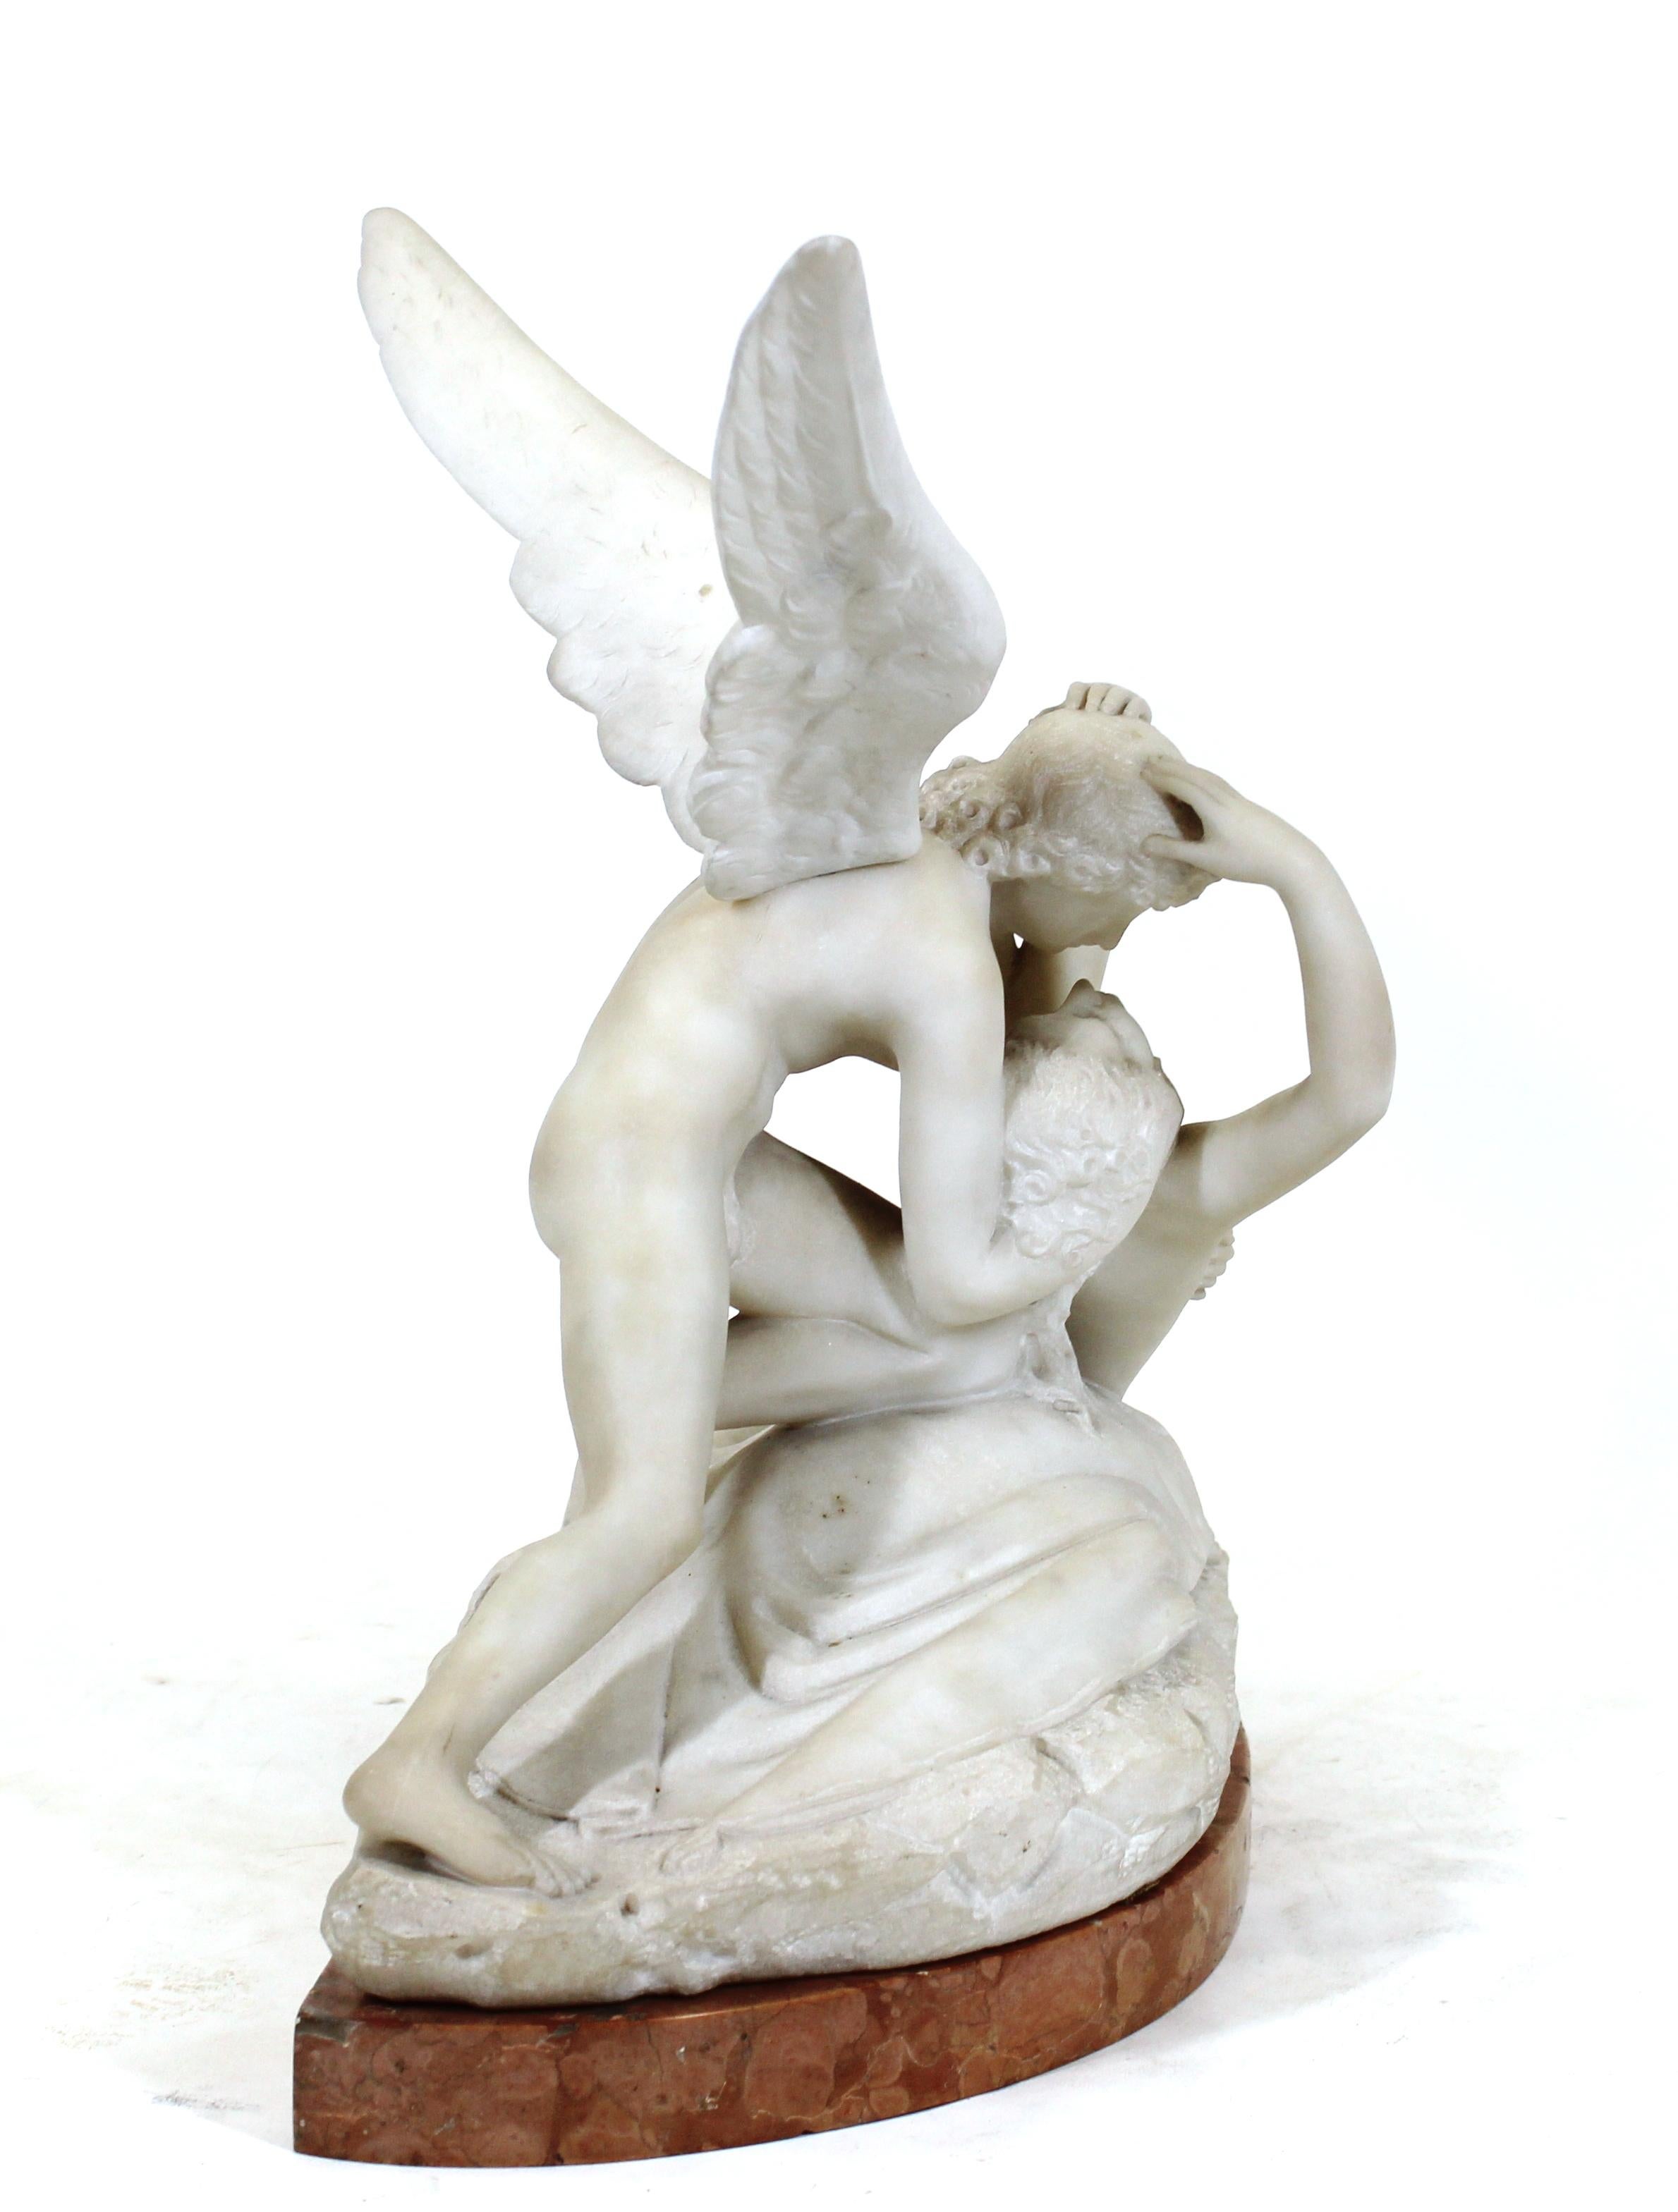 19th Century After Canova Italian Grand Tour Marble Cupid & Psyche Sculpture